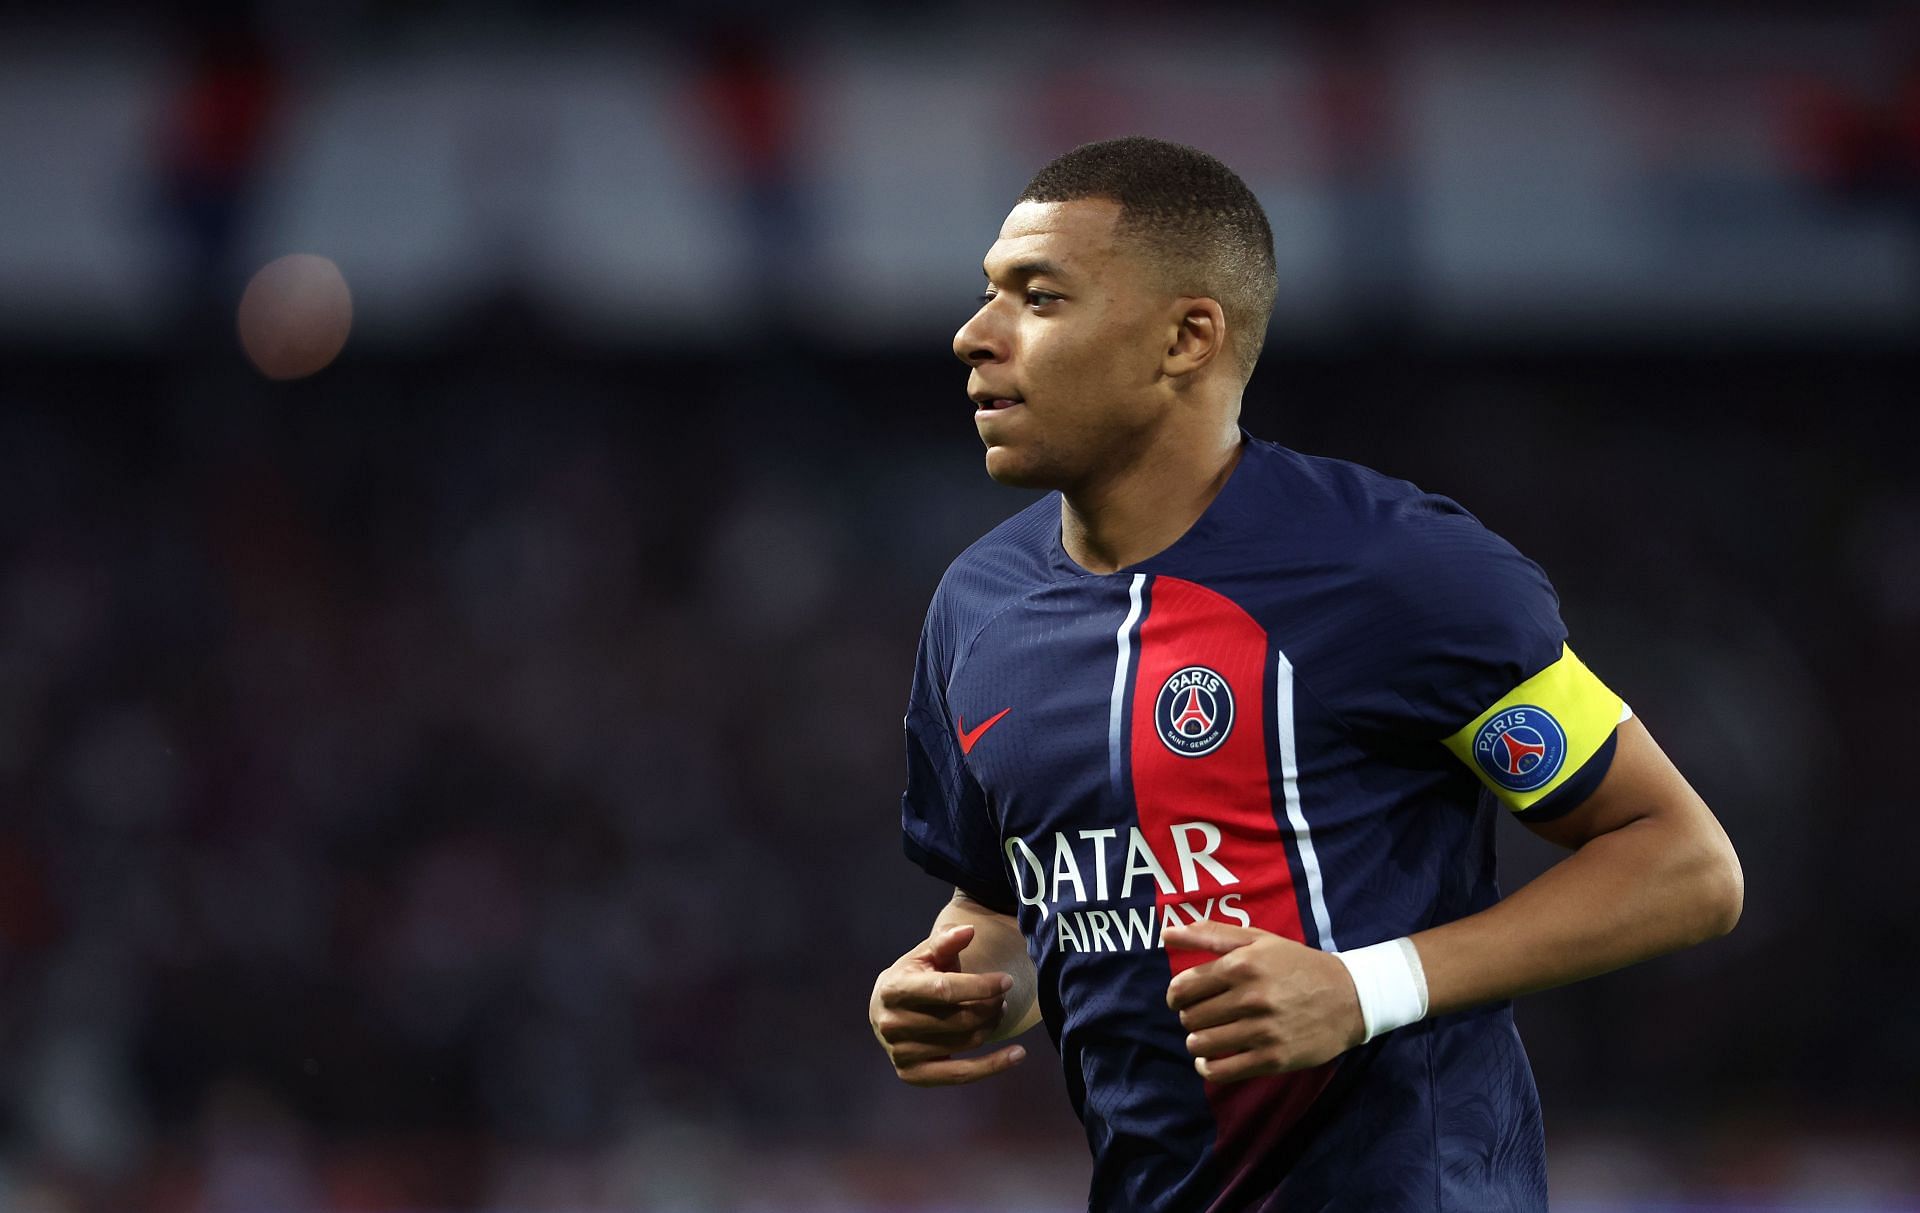 Kylian Mbappe will not move to Saudi Arabia this summer.